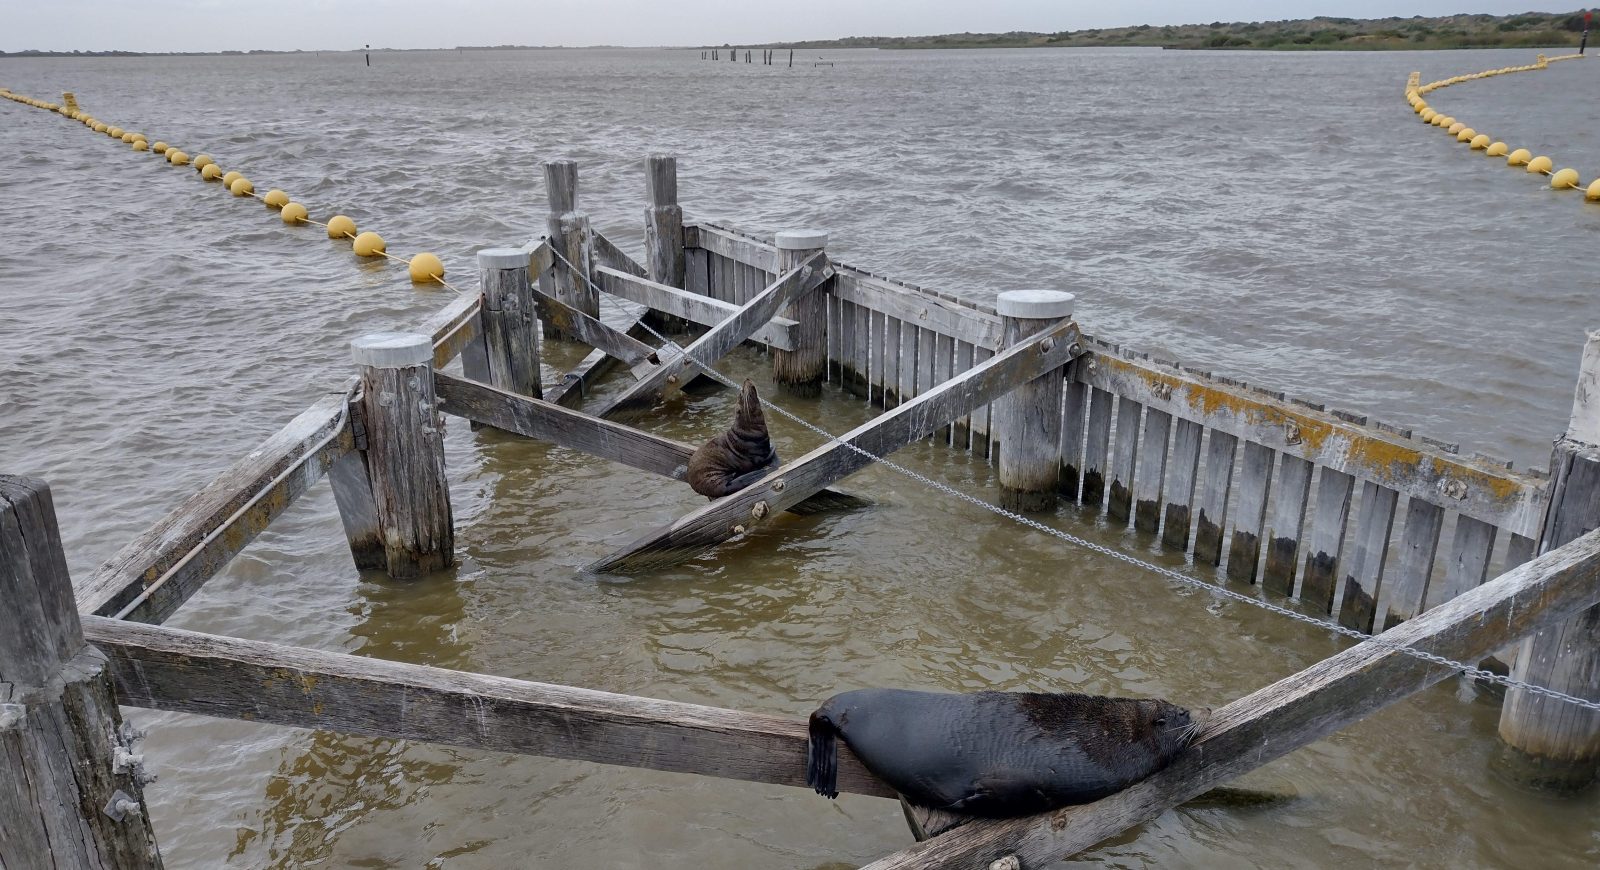 Sea lions resting on broken jetty over the Murray